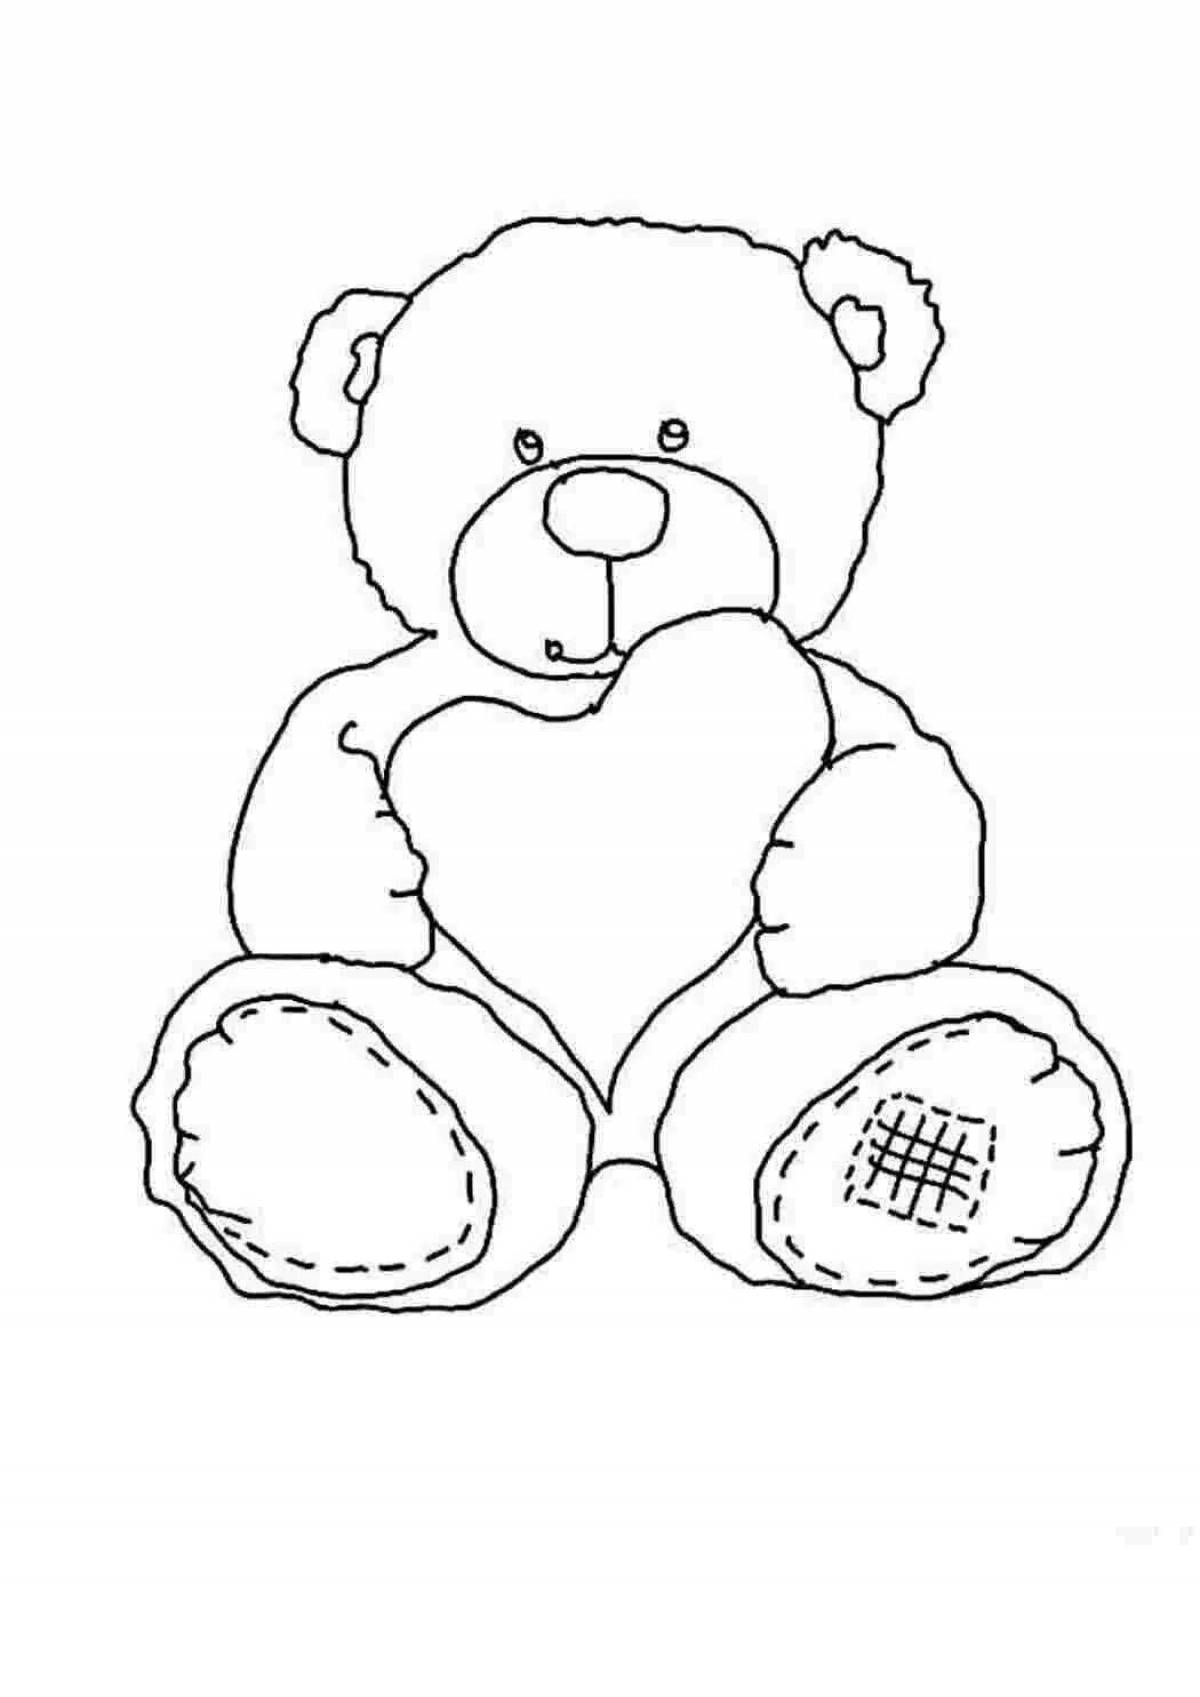 Colorful and cozy teddy bear coloring book